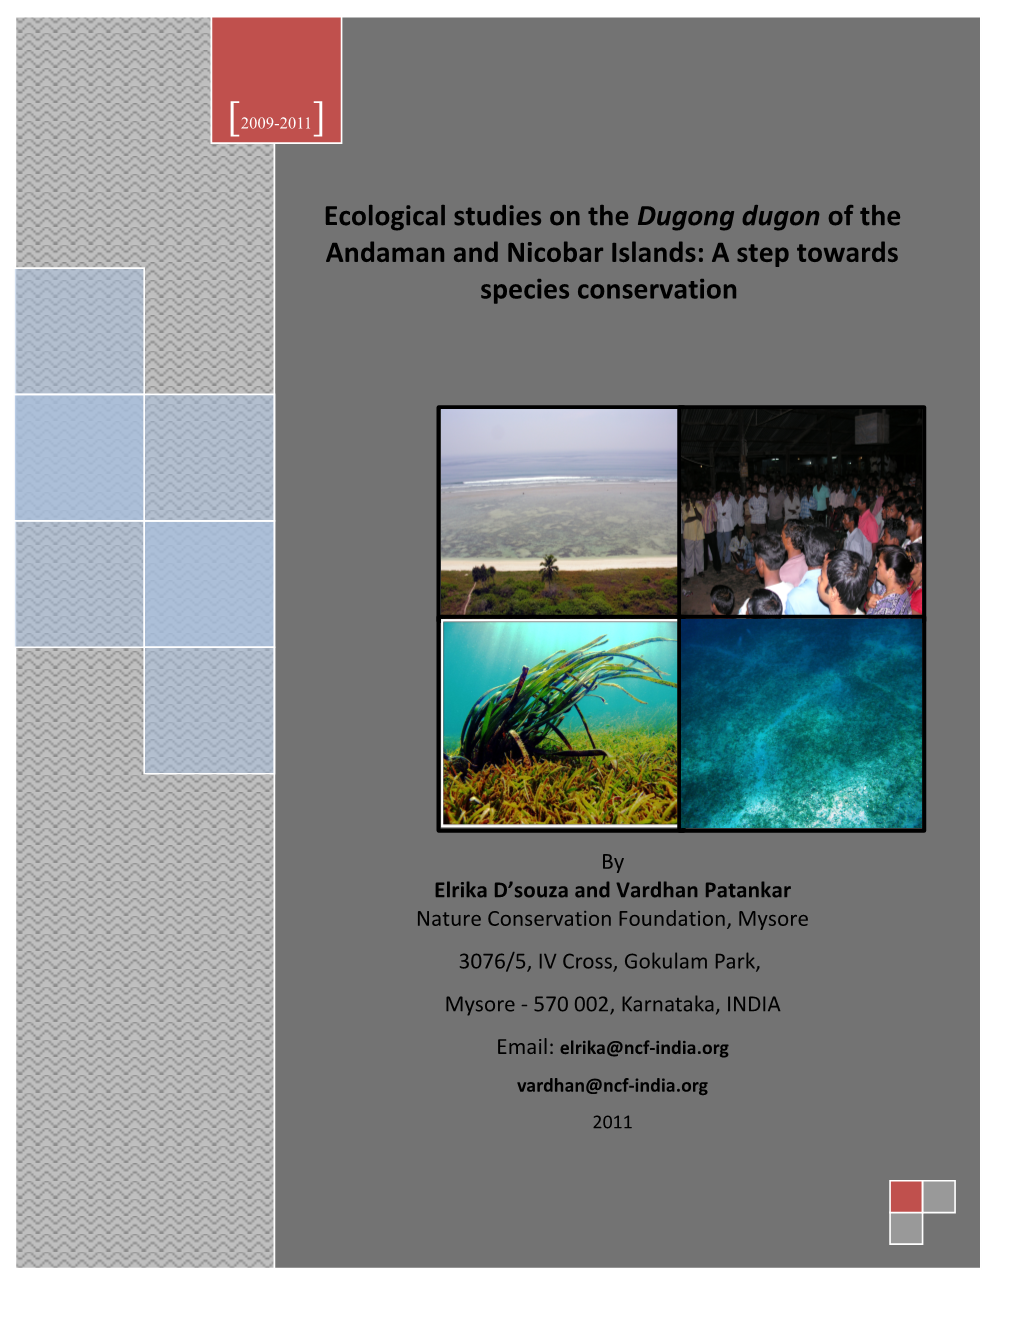 Ecological Studies on the Dugong Dugon of the Andaman and Nicobar Islands: a Step Towards Species Conservation